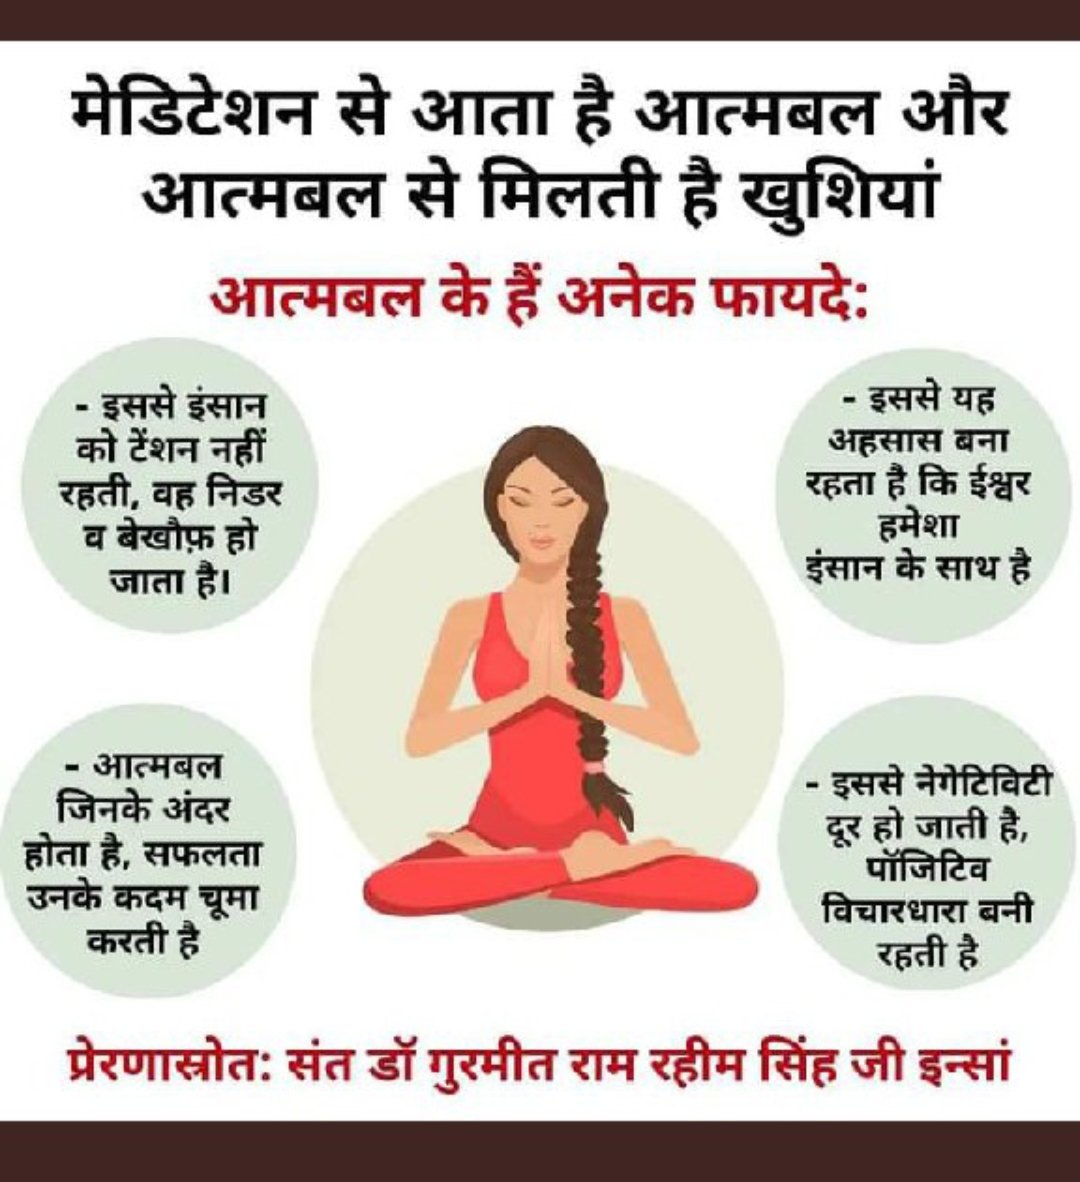 Saint Gurmeet Ram Rahim Ji Insan always motivate us to practice meditation as it removes all the negativity and worries and make self confident and successful. #PowerfulMantras